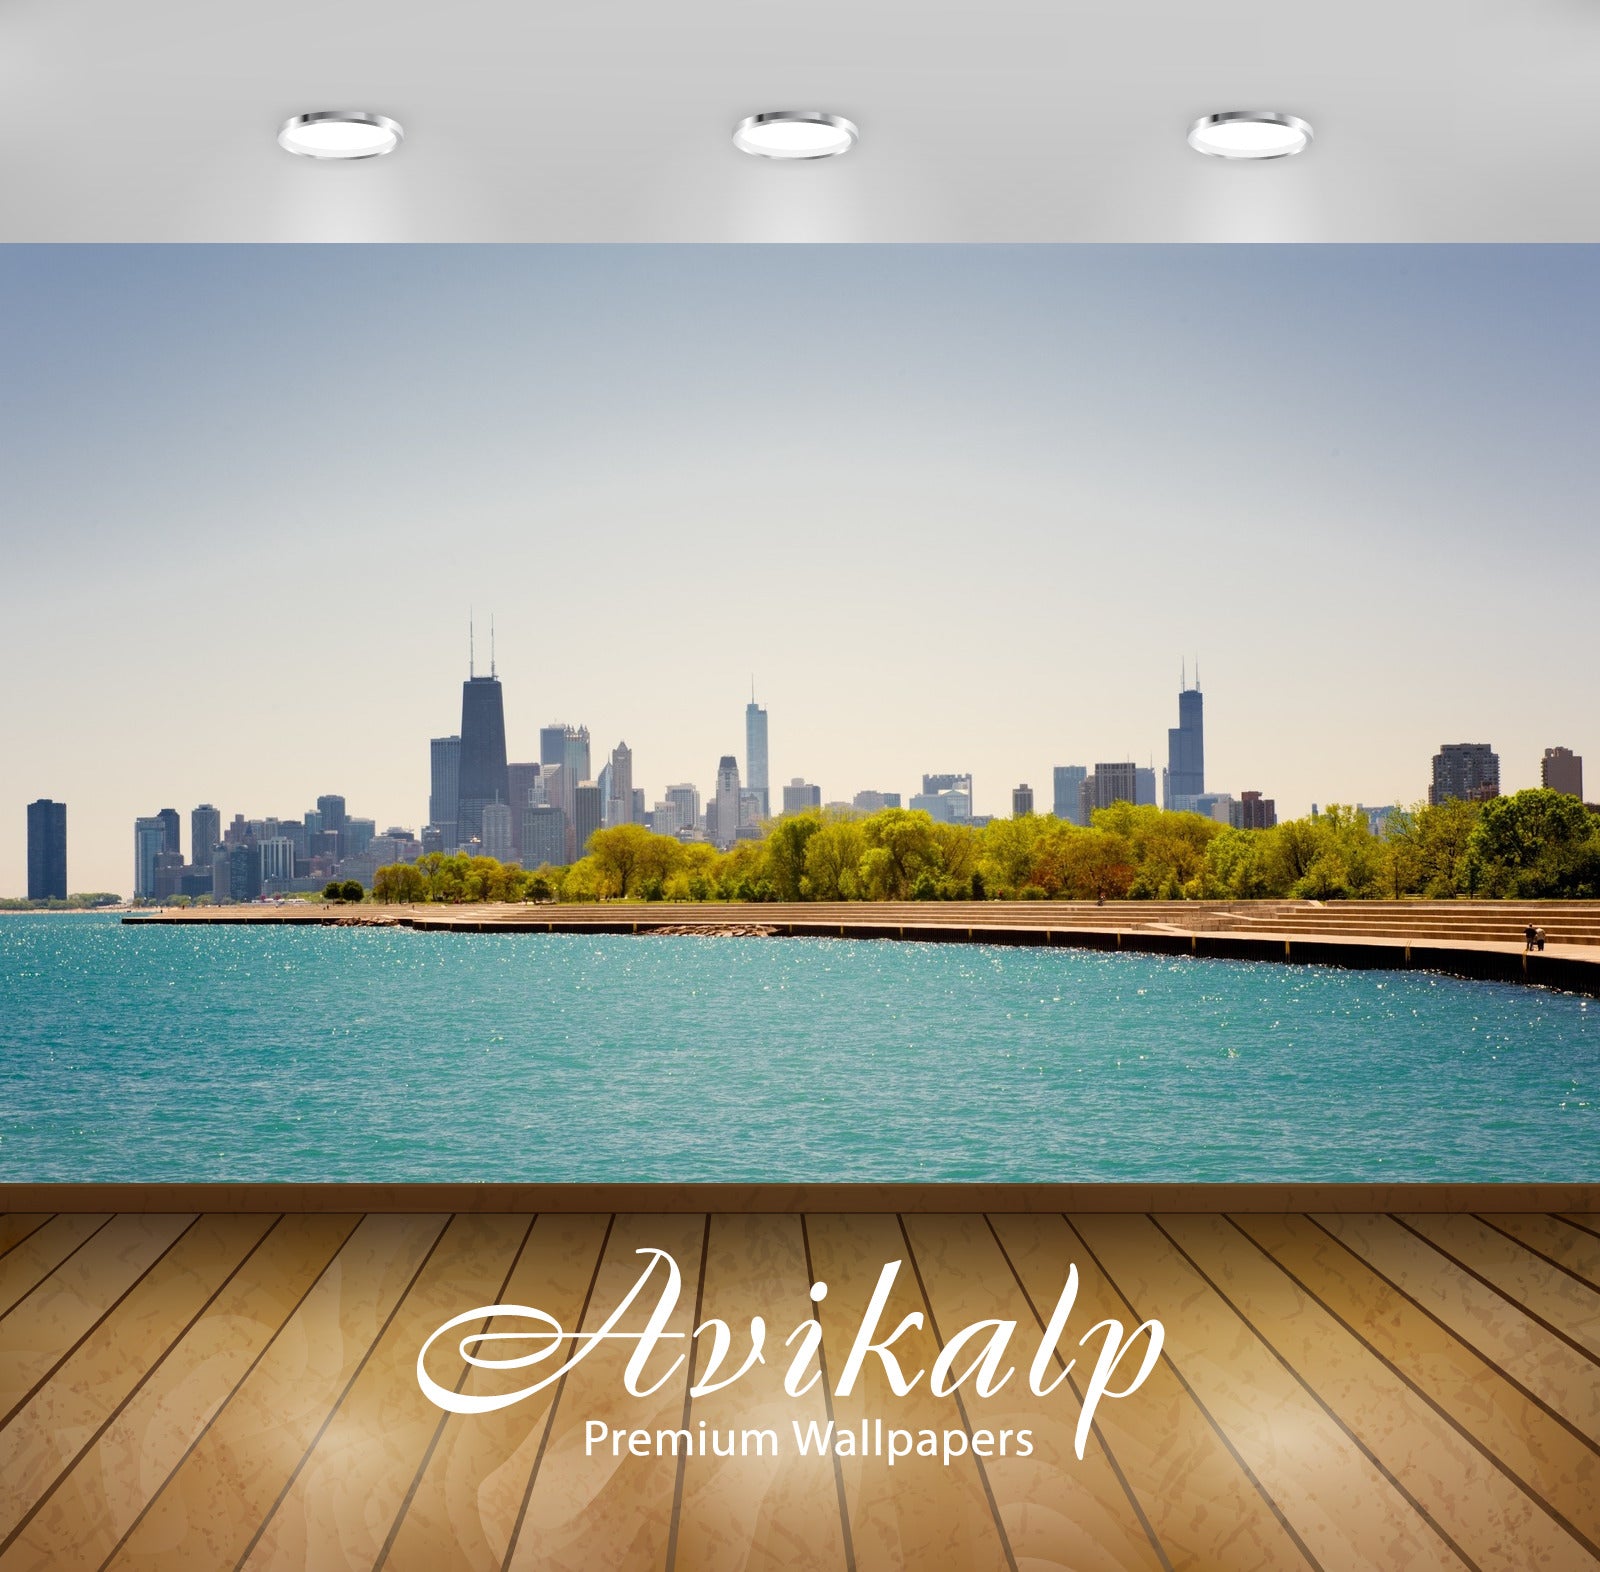 Avikalp Exclusive Awi1709 Chicago City View Full HD Wallpapers for Living room, Hall, Kids Room, Kit